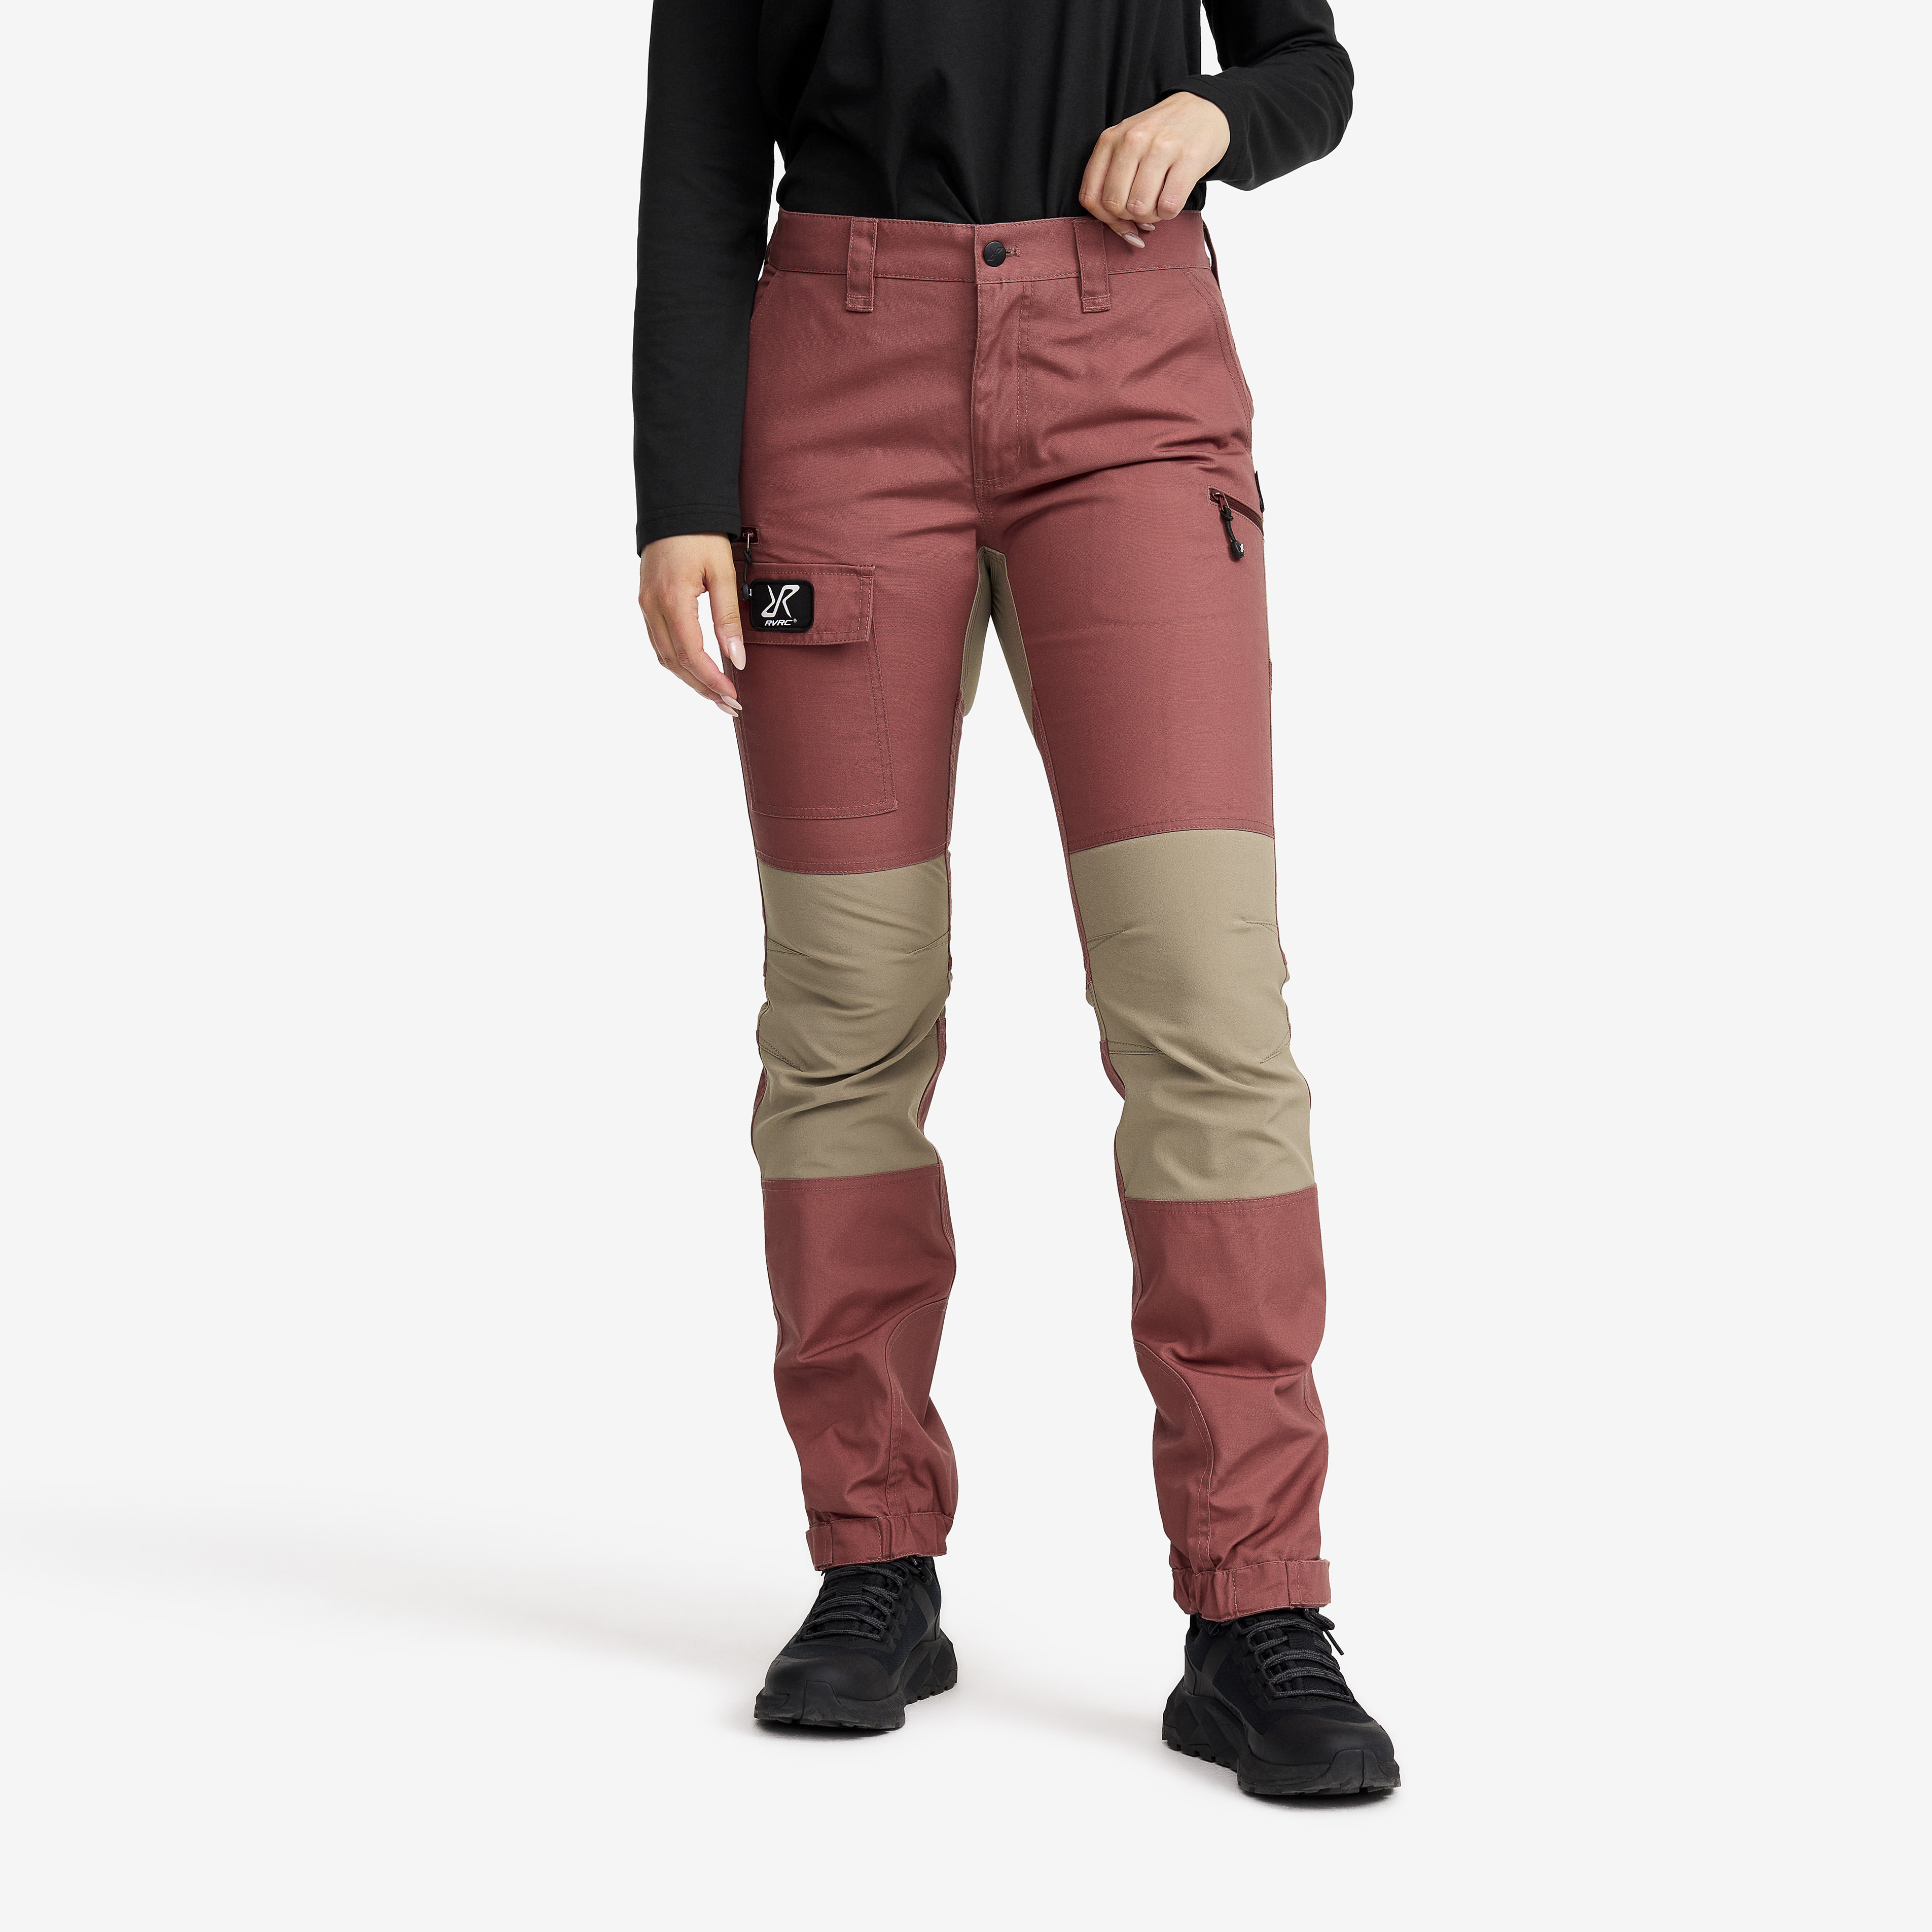 Nordwand Trousers Apple Butter/Brindle Women